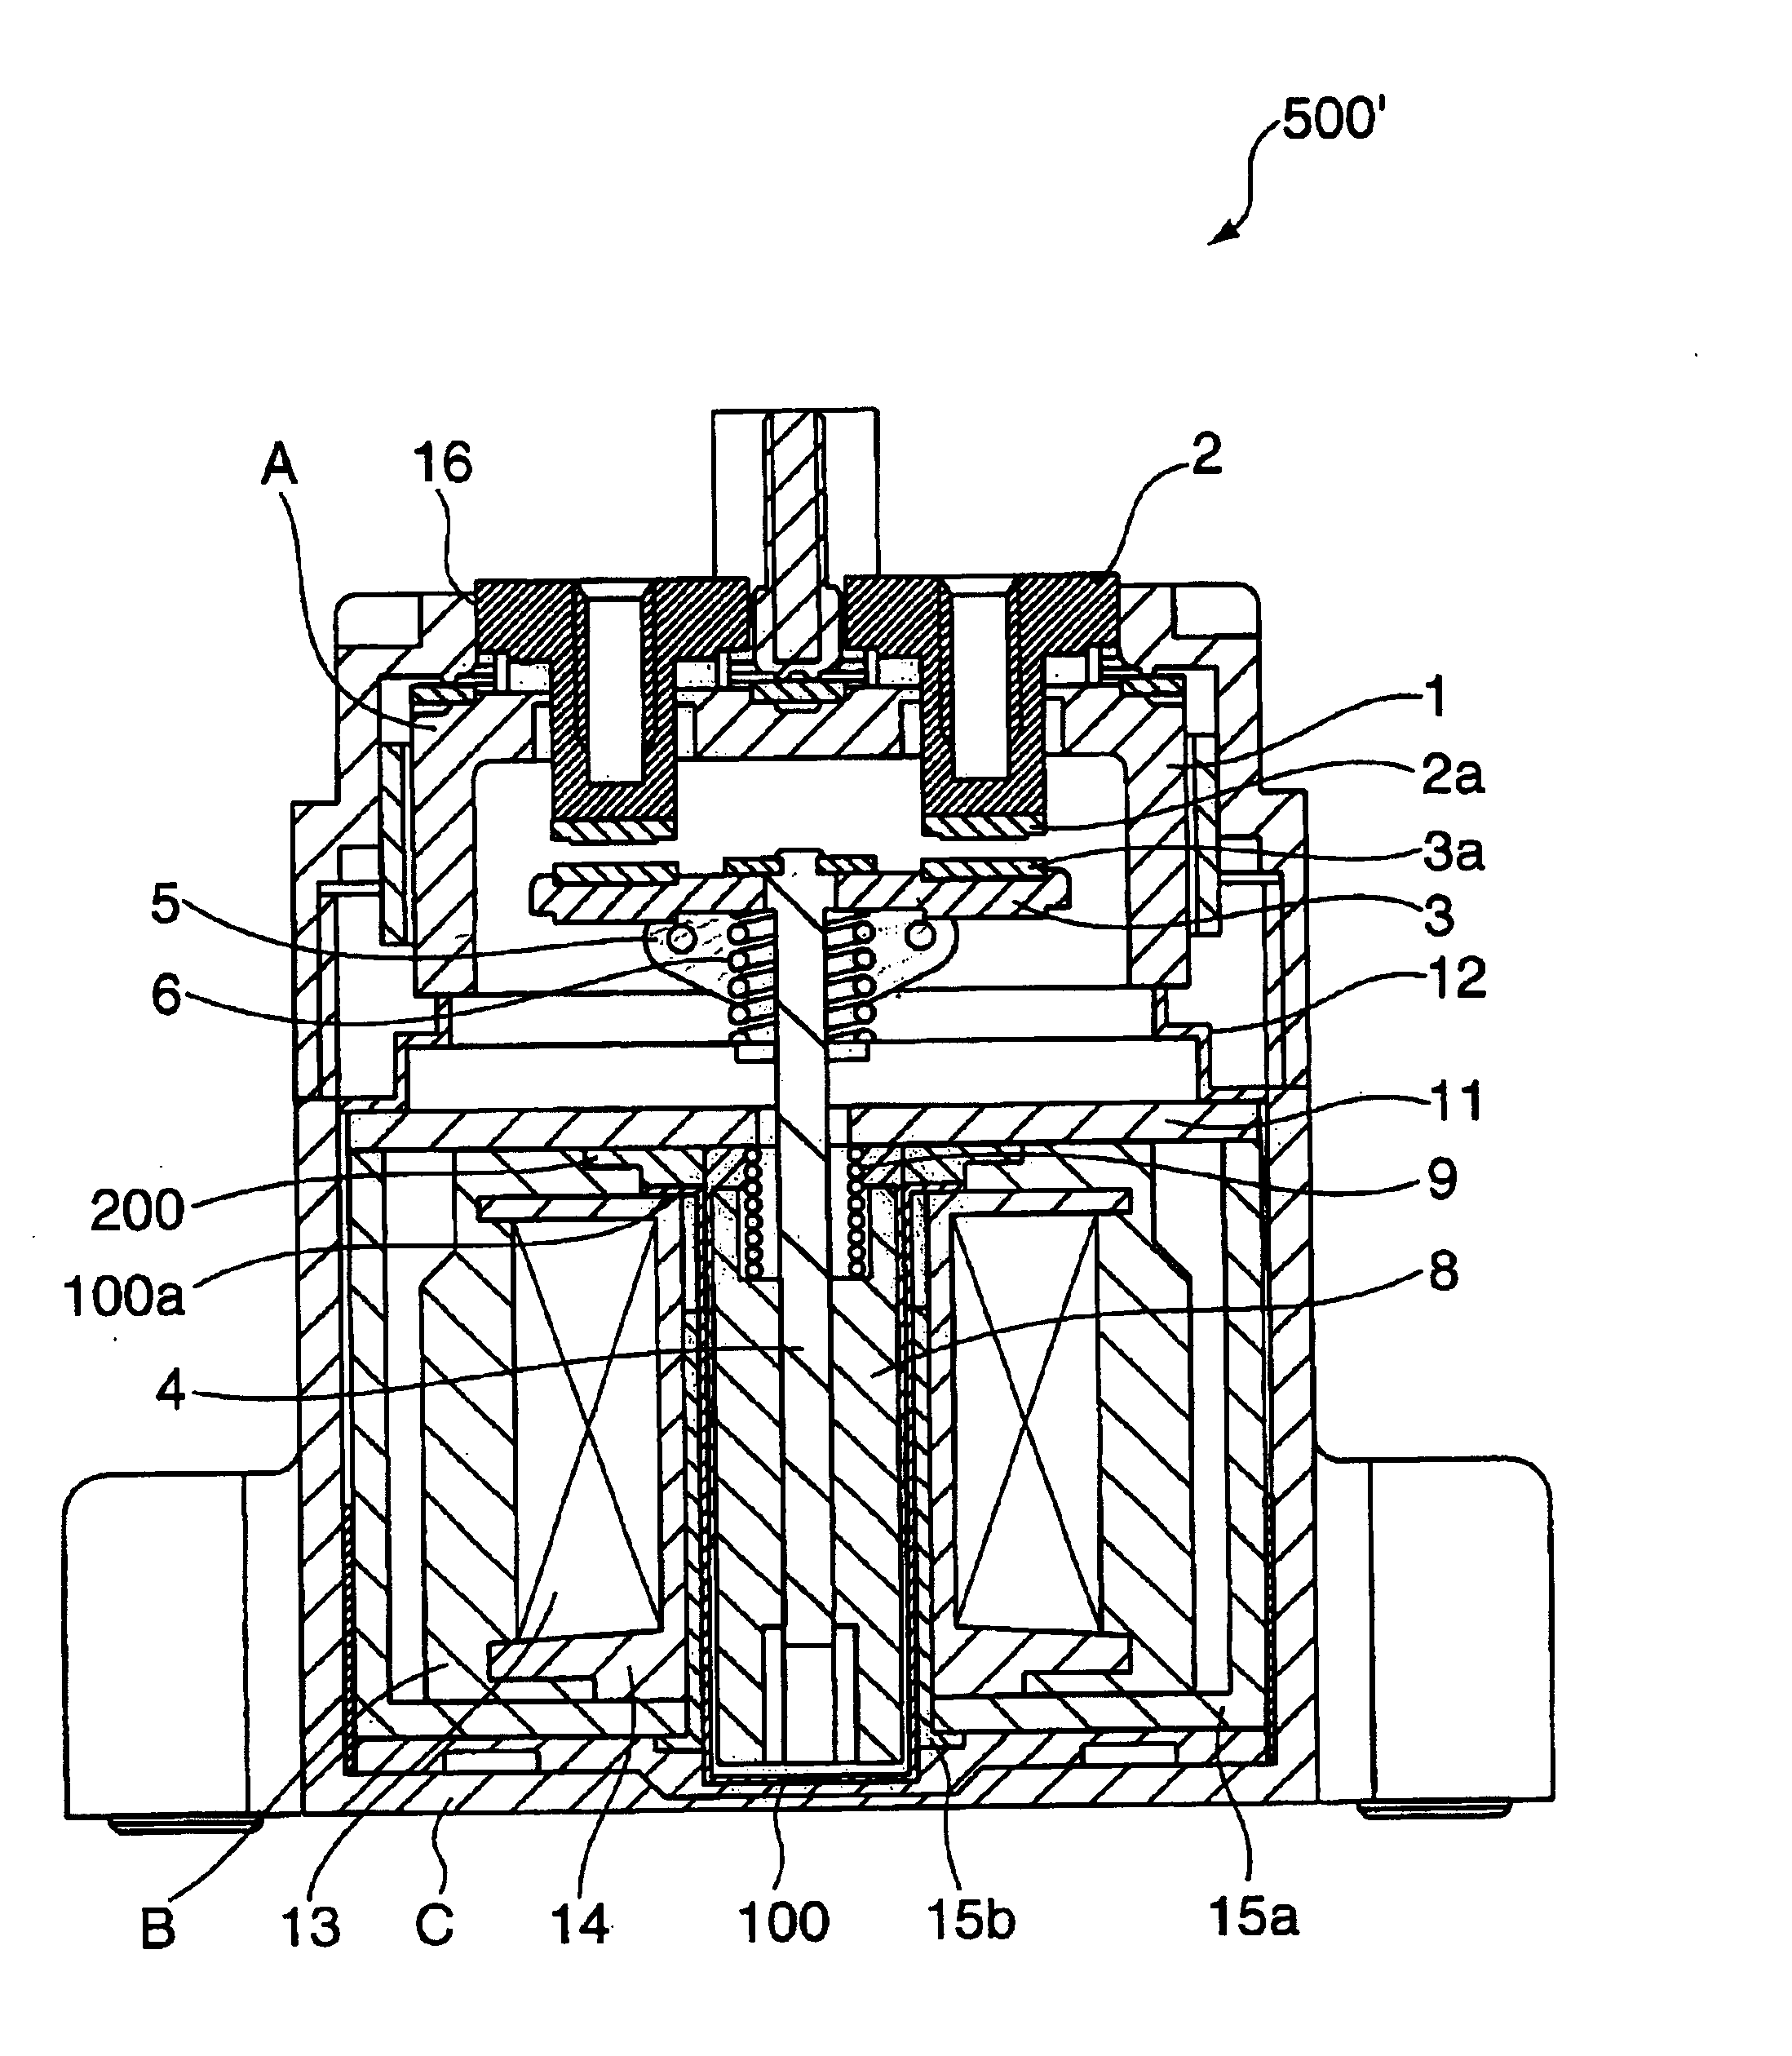 Electromagnetic switching apparatus